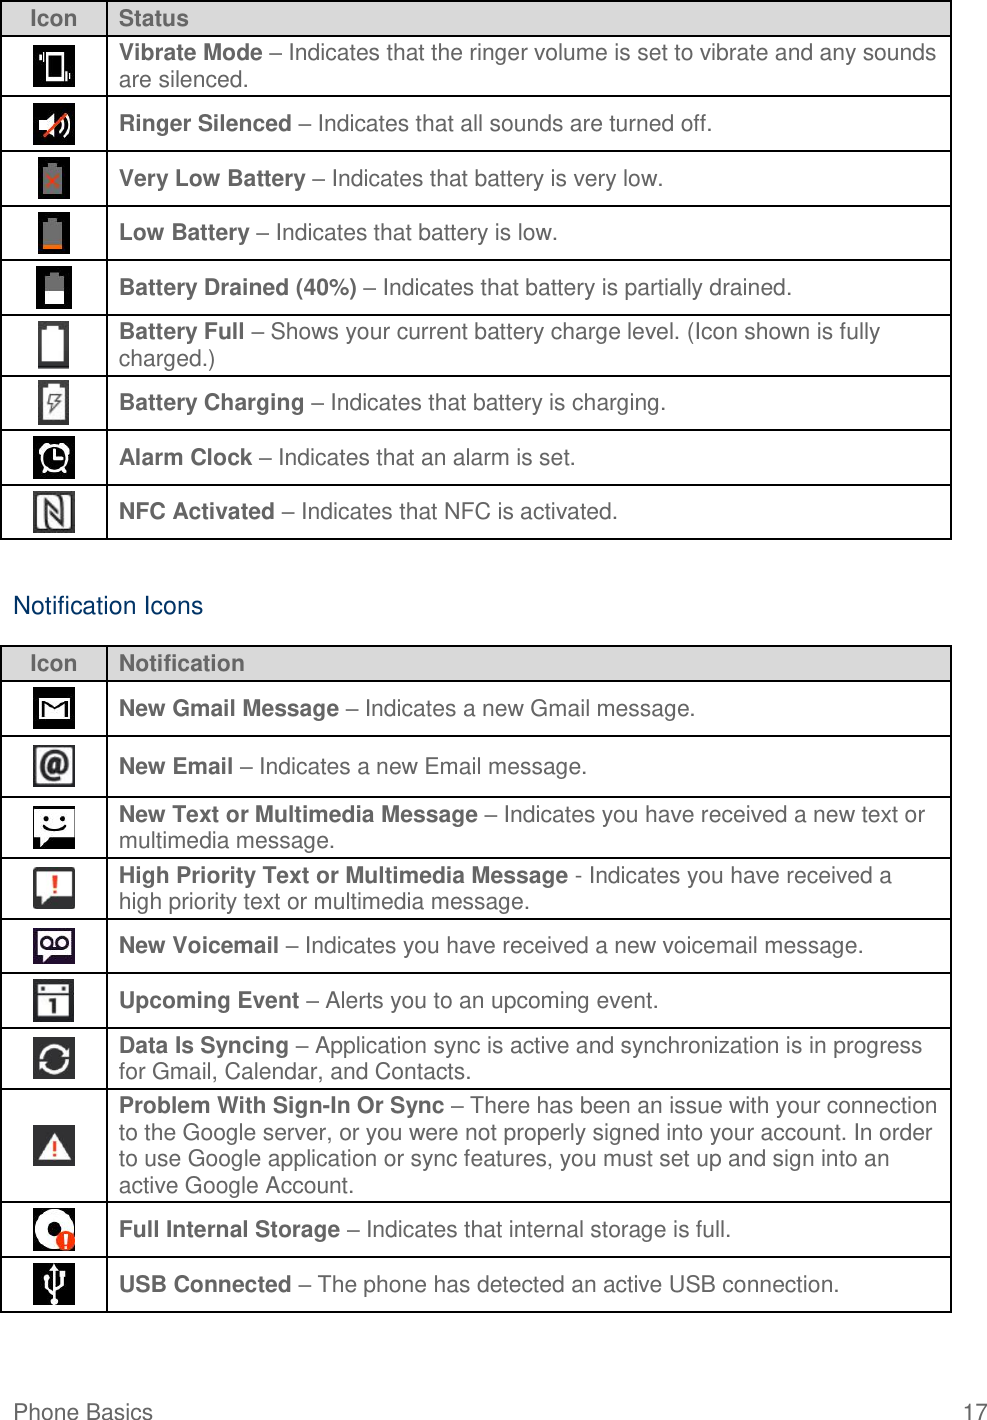 Phone Basics  17 Icon Status  Vibrate Mode – Indicates that the ringer volume is set to vibrate and any sounds are silenced.   Ringer Silenced – Indicates that all sounds are turned off.   Very Low Battery – Indicates that battery is very low.   Low Battery – Indicates that battery is low.   Battery Drained (40%) – Indicates that battery is partially drained.   Battery Full – Shows your current battery charge level. (Icon shown is fully charged.)   Battery Charging – Indicates that battery is charging.   Alarm Clock – Indicates that an alarm is set.   NFC Activated – Indicates that NFC is activated.   Notification Icons Icon Notification  New Gmail Message – Indicates a new Gmail message.   New Email – Indicates a new Email message.   New Text or Multimedia Message – Indicates you have received a new text or multimedia message.   High Priority Text or Multimedia Message - Indicates you have received a high priority text or multimedia message.  New Voicemail – Indicates you have received a new voicemail message.   Upcoming Event – Alerts you to an upcoming event.   Data Is Syncing – Application sync is active and synchronization is in progress for Gmail, Calendar, and Contacts.   Problem With Sign-In Or Sync – There has been an issue with your connection to the Google server, or you were not properly signed into your account. In order to use Google application or sync features, you must set up and sign into an active Google Account.   Full Internal Storage – Indicates that internal storage is full.   USB Connected – The phone has detected an active USB connection.  